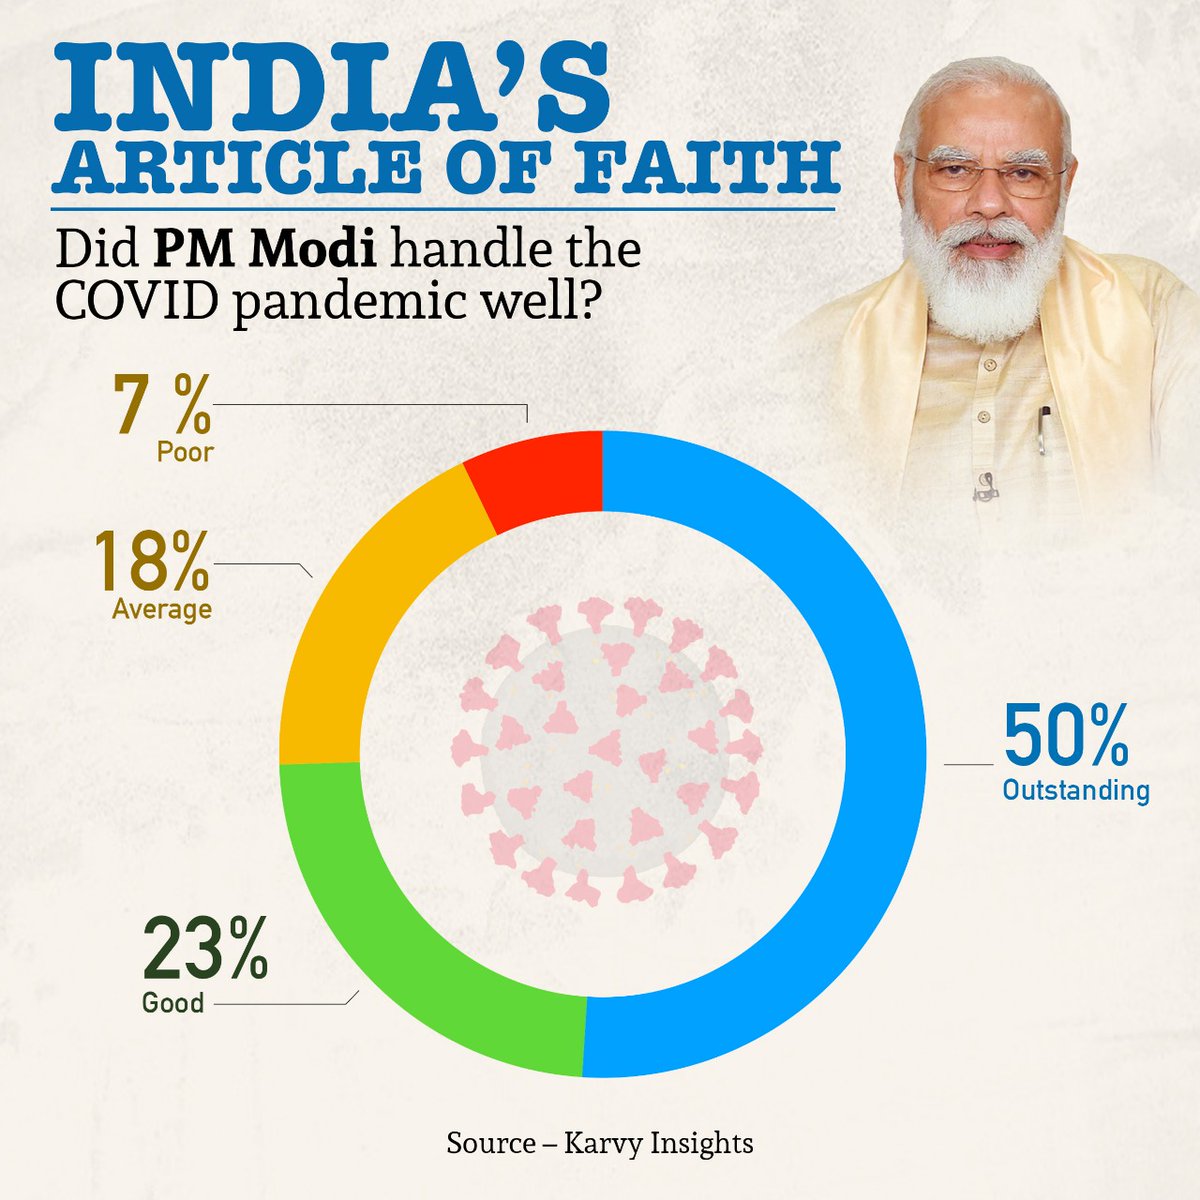 Leadership of PM @narendramodi is India’s article of faith!

Did PM Modi handle the pandemic well?

73% respondents answer in the affirmative in an India Today-Karvy Insights survey. 

#IndiaTrustsModi